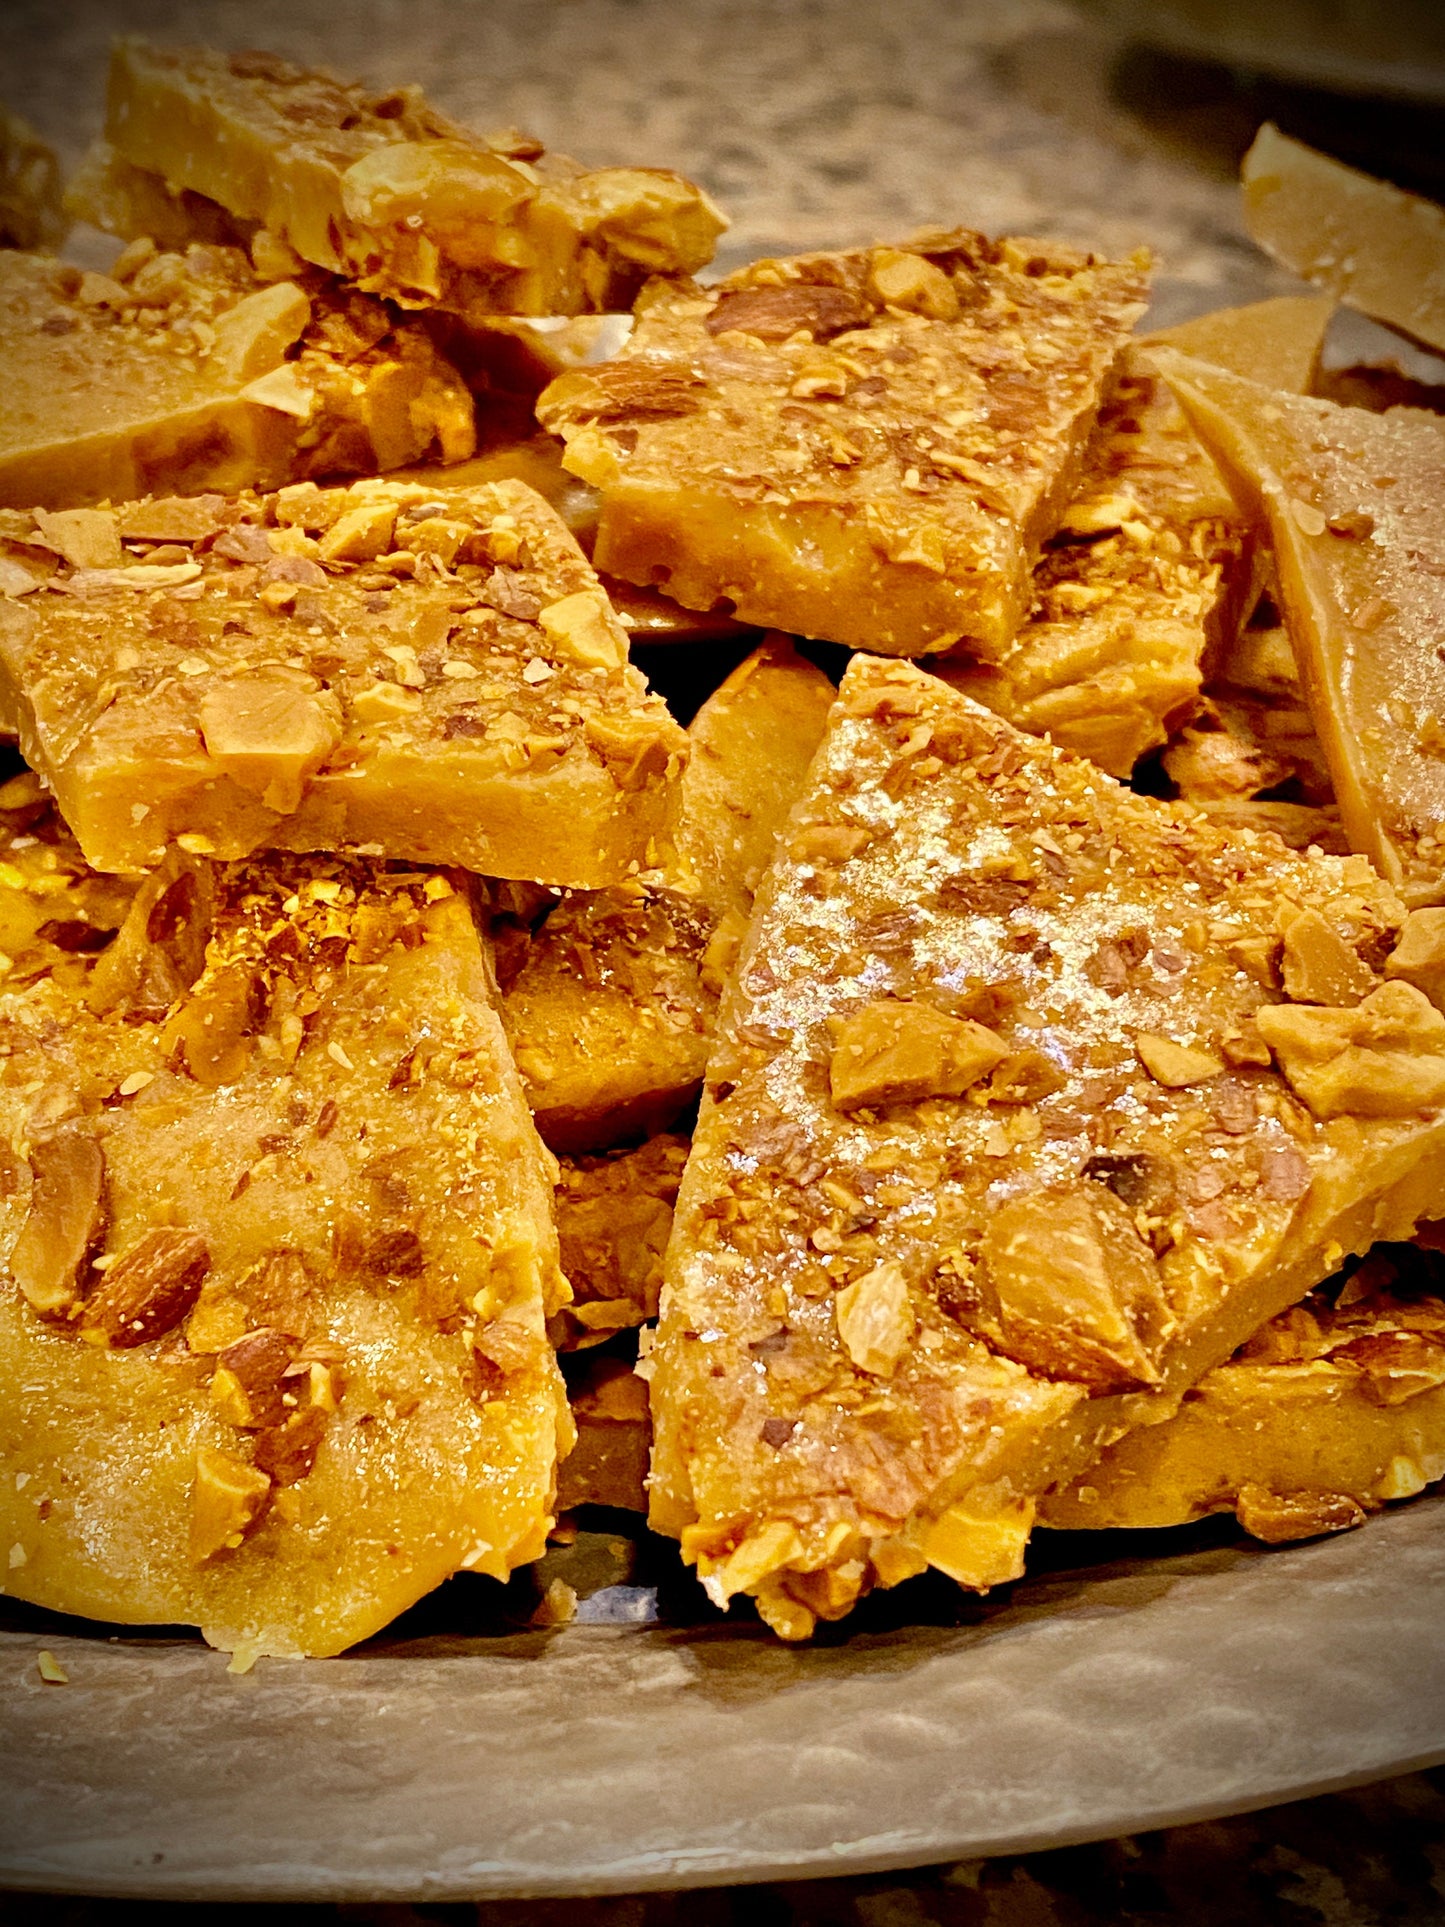 Toffee with freshly roasted almonds